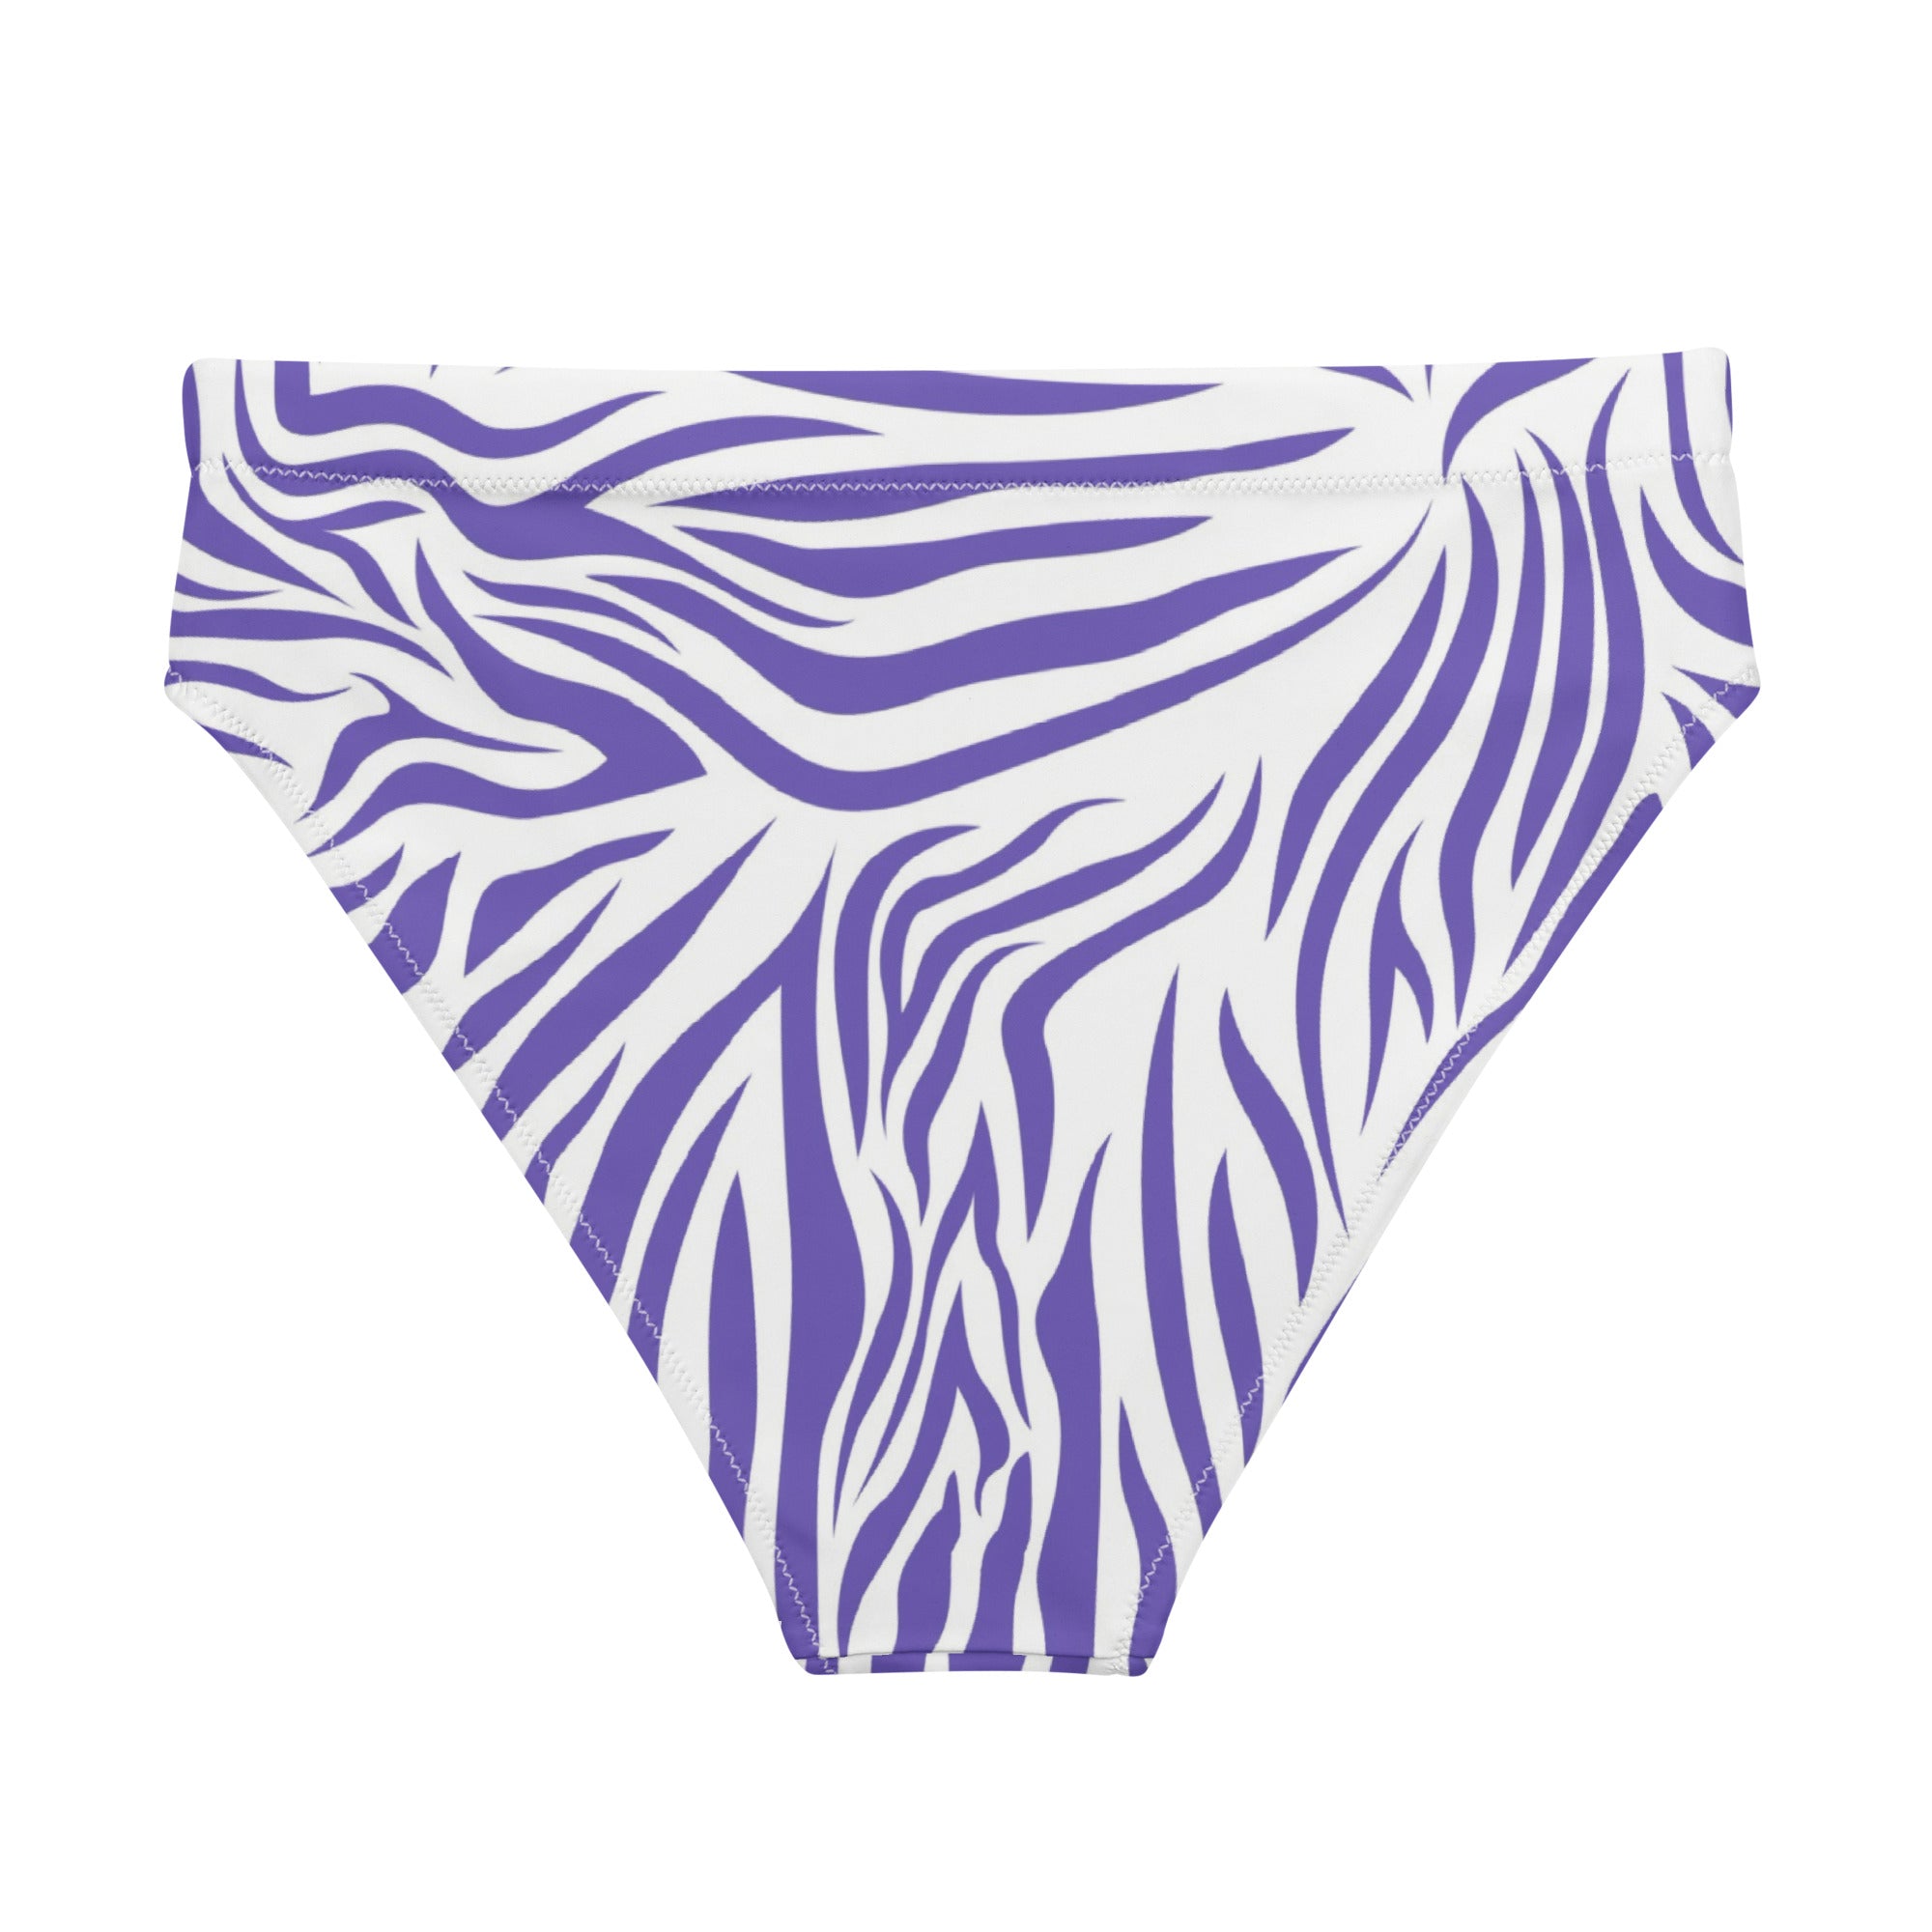 These bikini bottoms are designed to provide a comfortable and flattering fit, with a low-rise waist and medium coverage at the back.